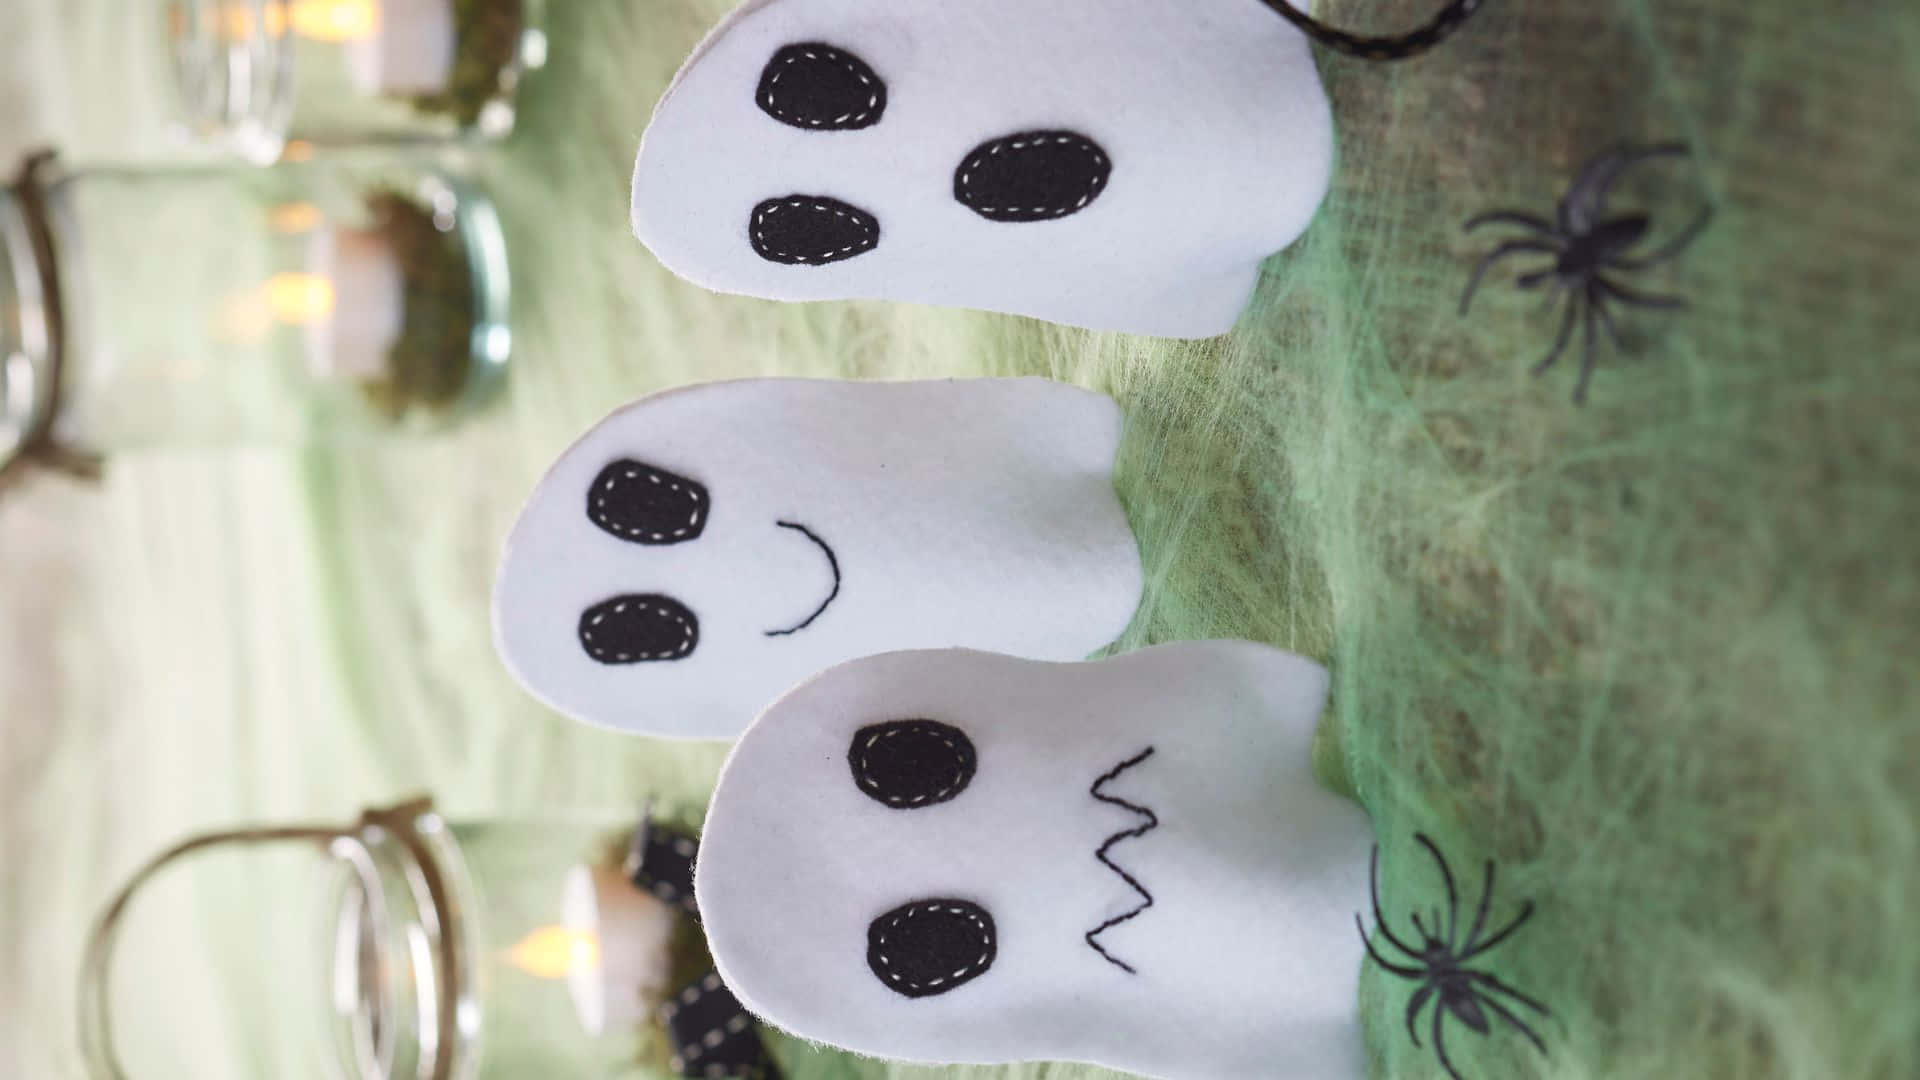 Get crafty this Halloween with spooky decorations! Wallpaper